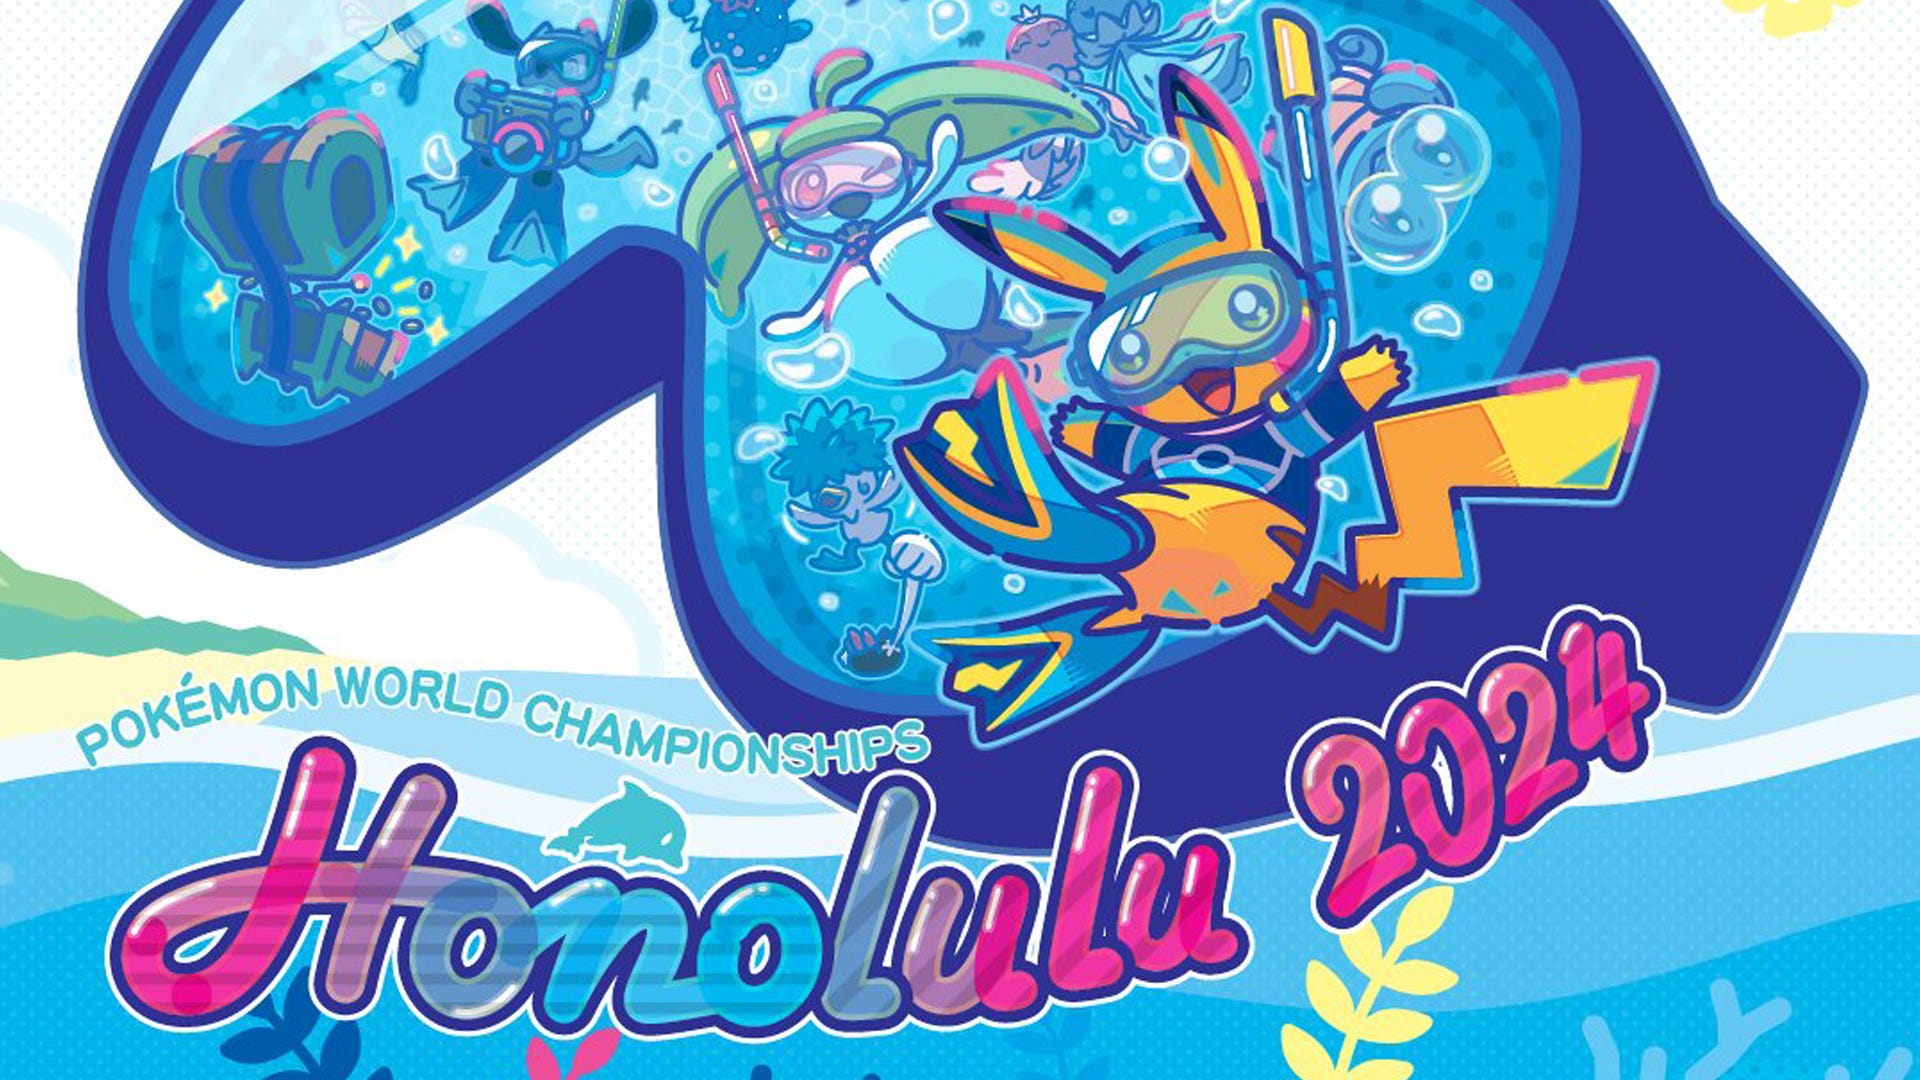 Attention, trainers: The Pokemon World Championship dates have been set for this summer